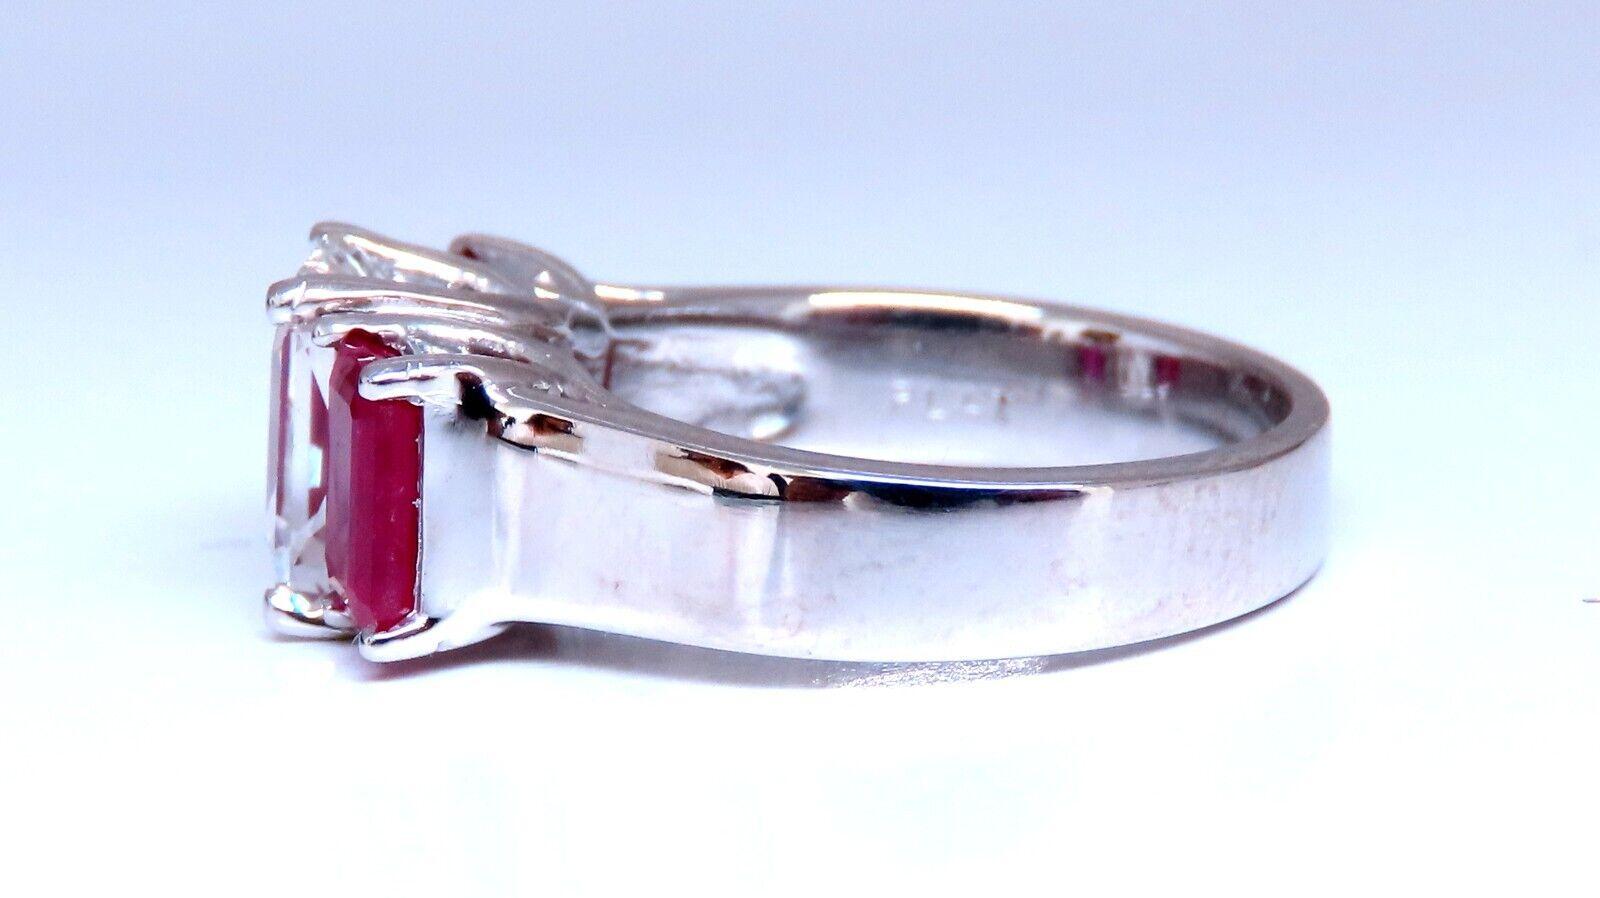 1.90ct Natural White sapphire ring.

(VS) Clean Clarity 

8 X 6mm



1.90ct side natural emerald cut rubies

Semi Transparent/ vivid red.



Platinum

8.7 grams.

Depth: 7mm

current ring size: 5

can be resized 

please inquire 

$7,000 appraisal